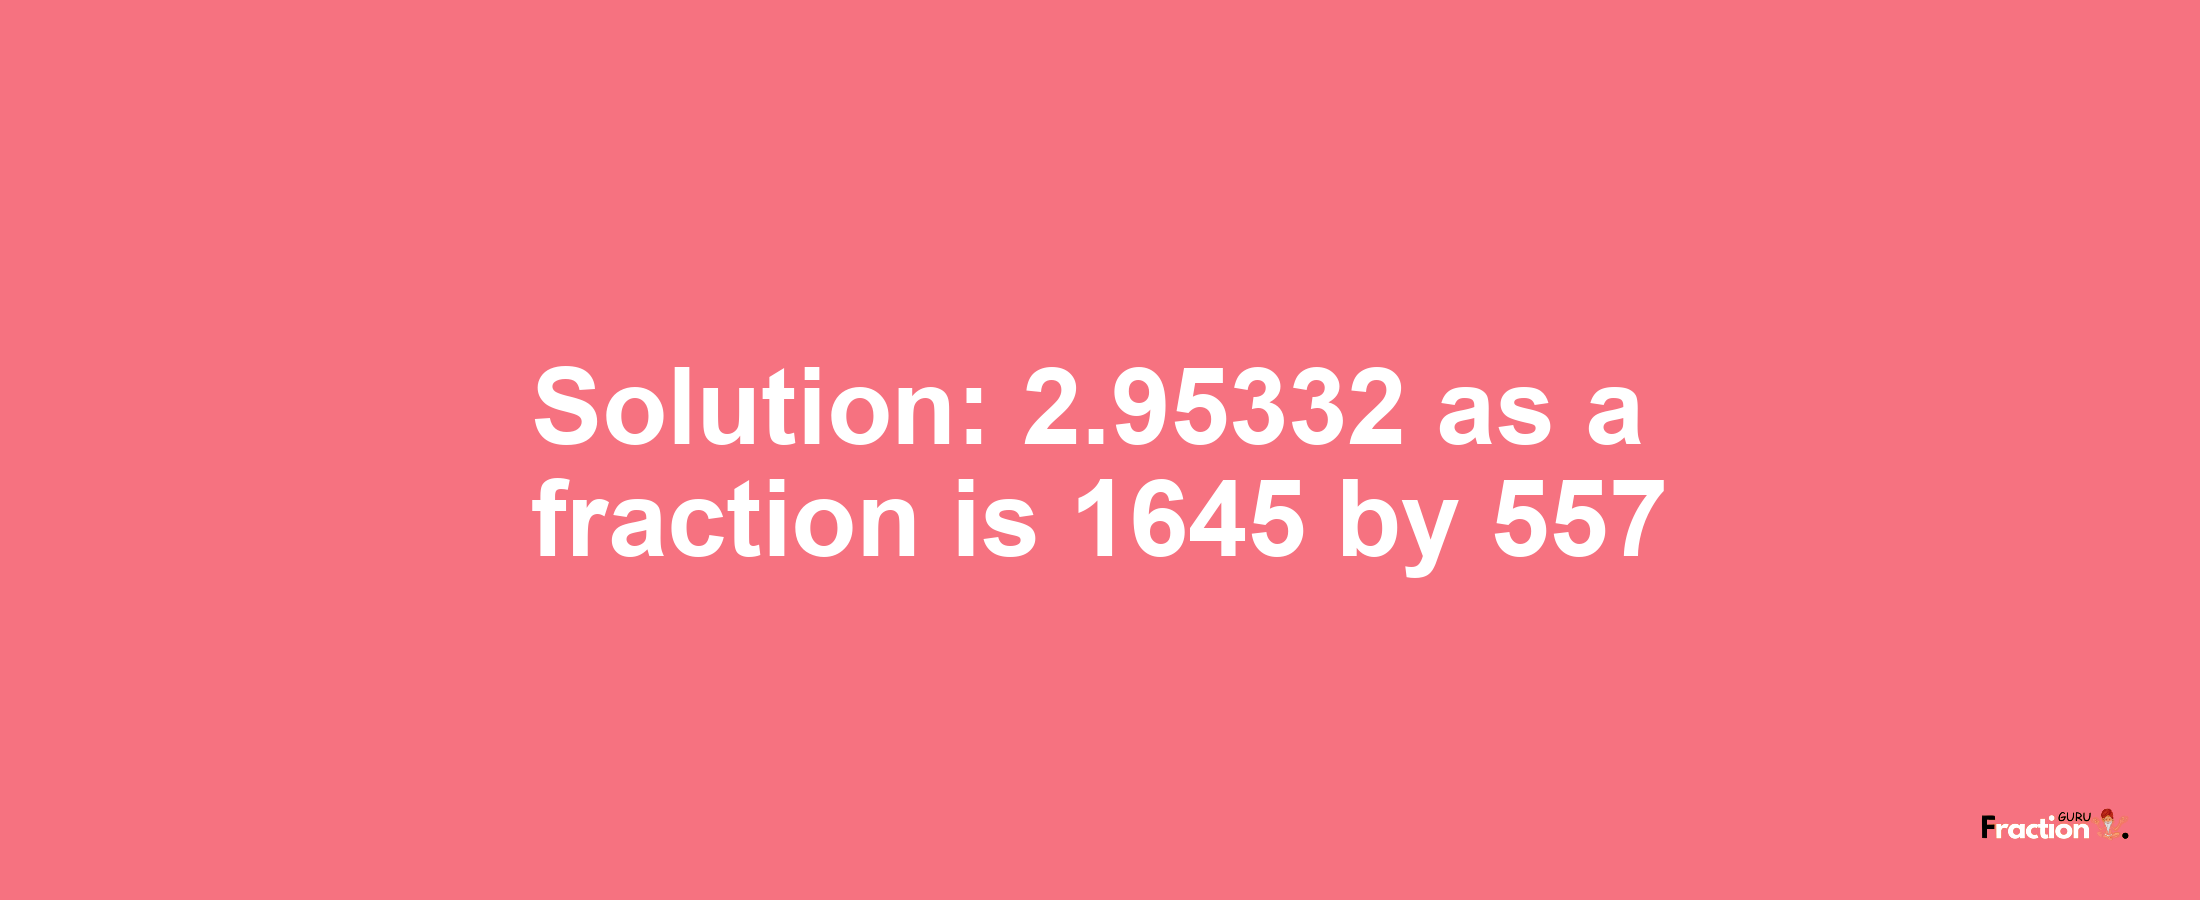 Solution:2.95332 as a fraction is 1645/557